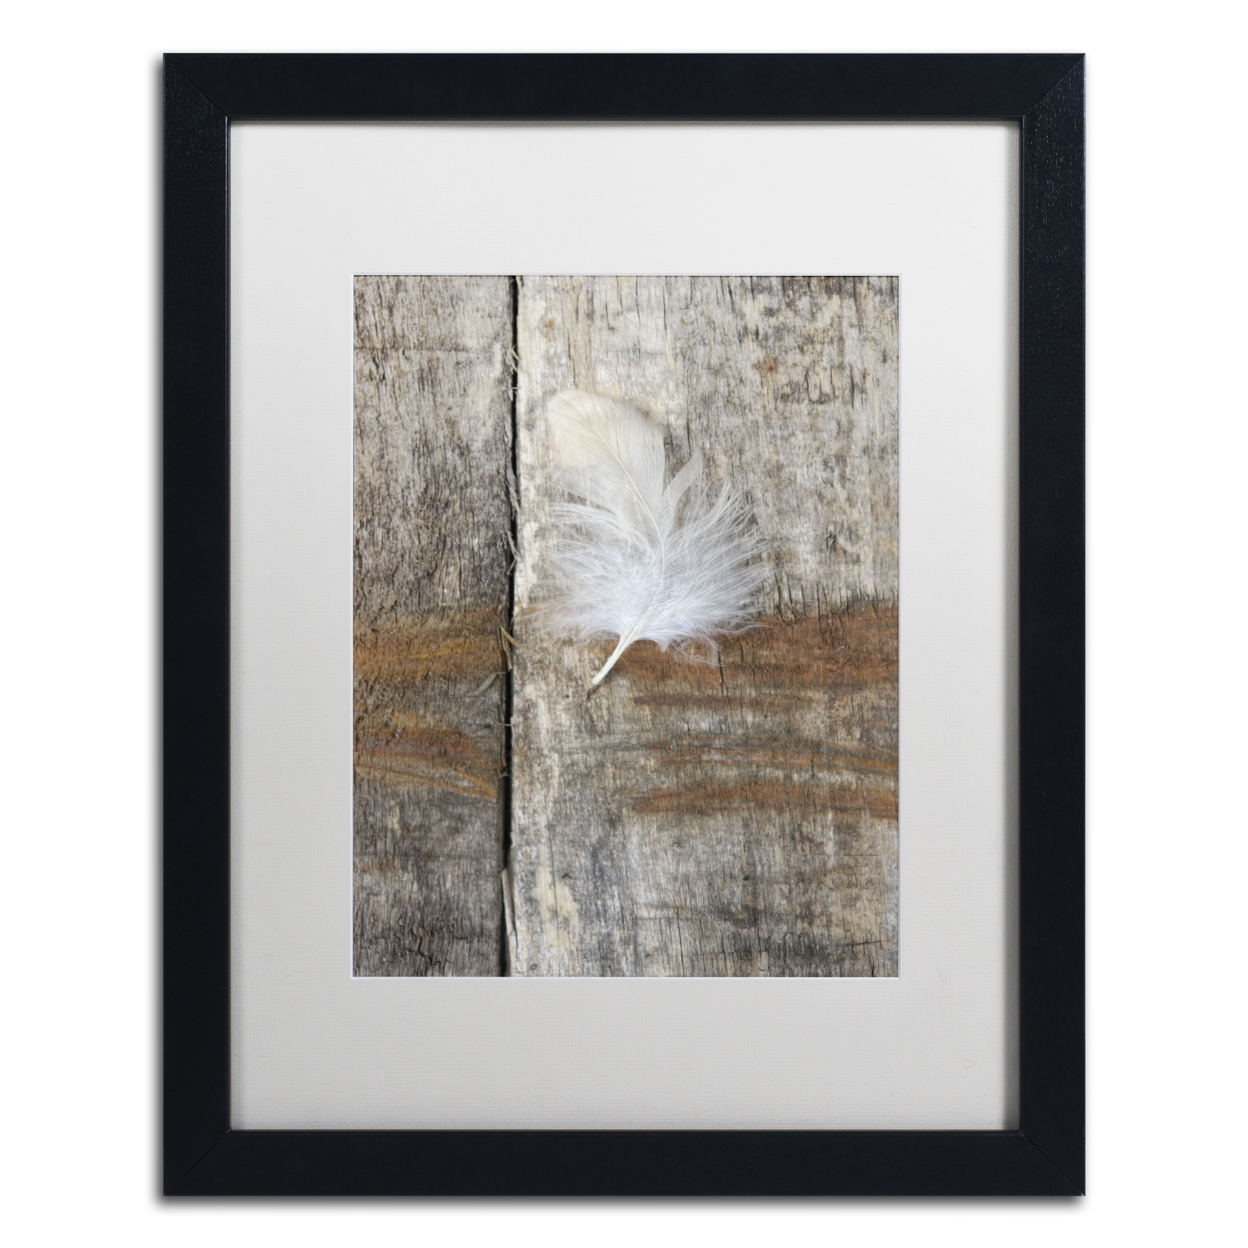 Cora Niele 'Feather On Wood I' Black Wooden Framed Art 18 X 22 Inches